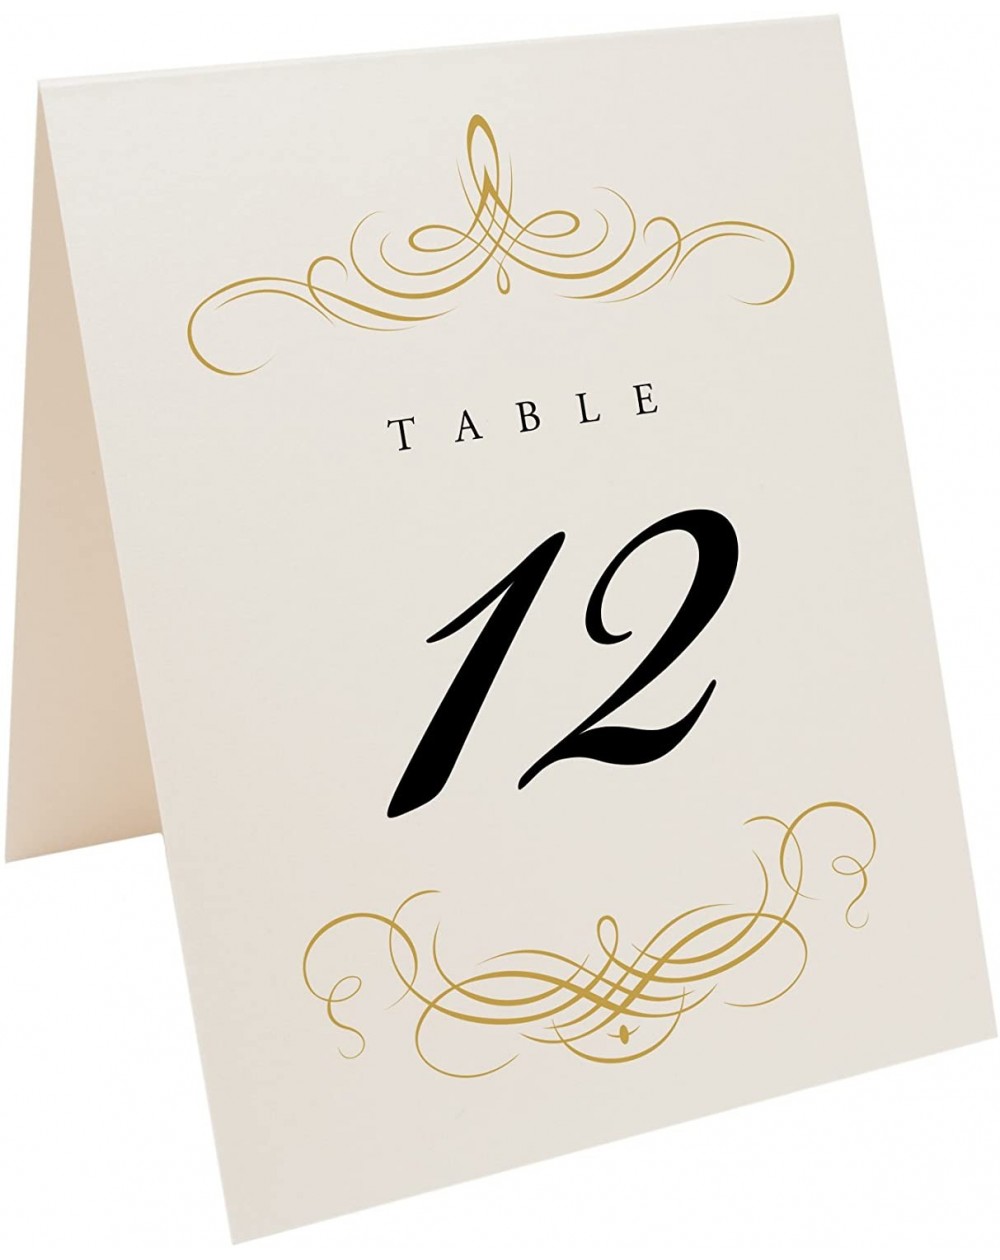 Place Cards & Place Card Holders Decadent Flourish Table Numbers (Select Color/Quantity)- Champagne- Gold- 1-10- Perfect for ...